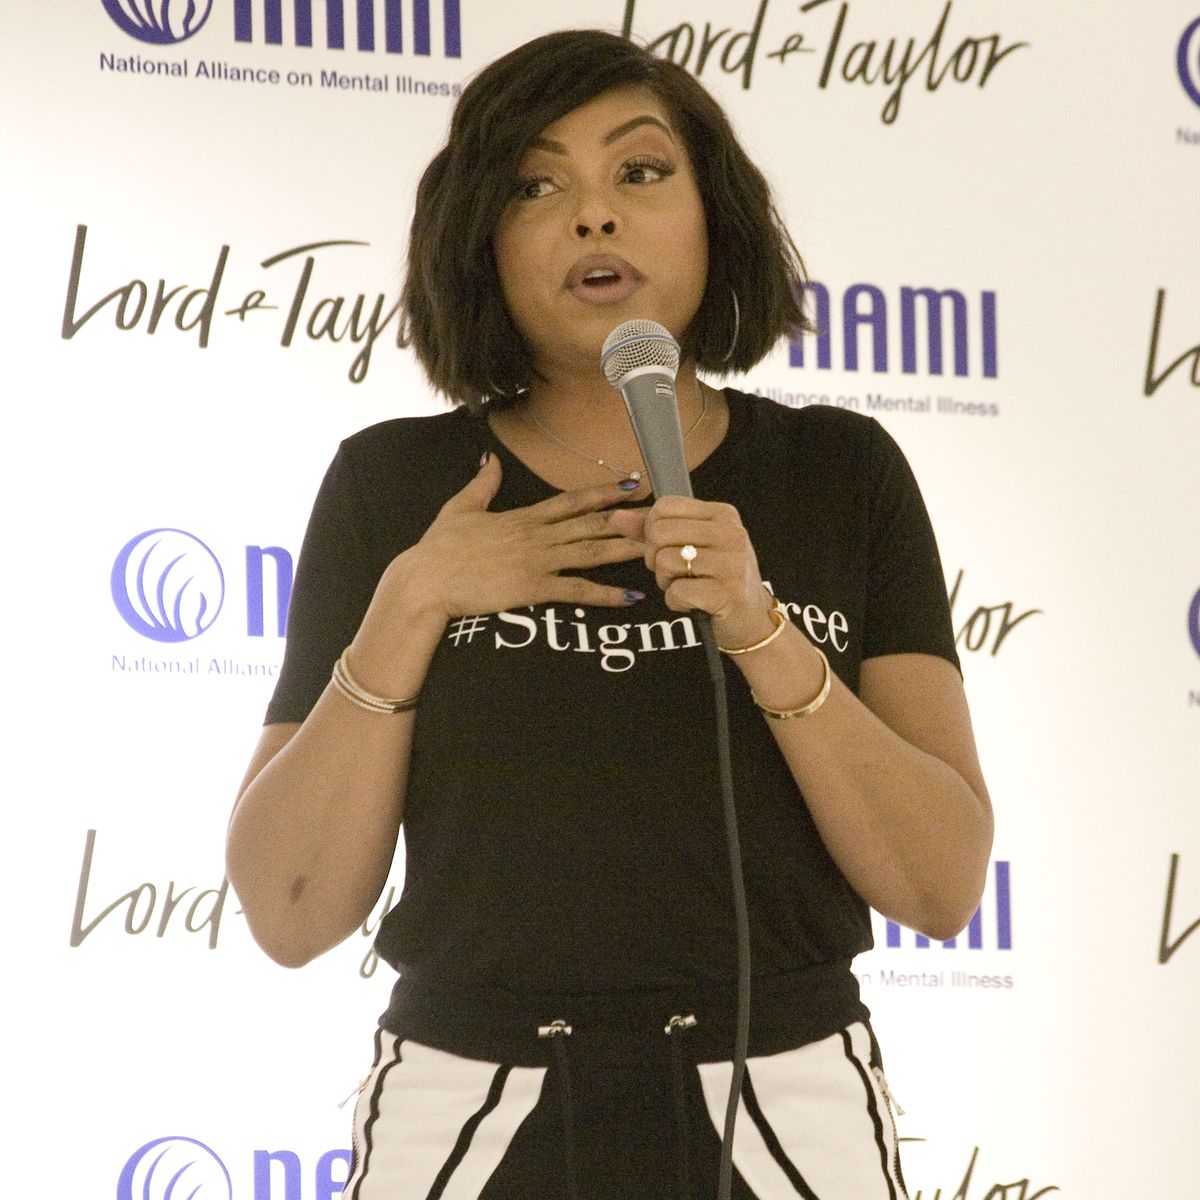 Taraji P. Henson, speaking at a Jan. 12 National Alliance on Mental Illness event in Schaumburg, said she wants to elevate mental health in the national conversation. | Karen Kring/For the Sun-Times